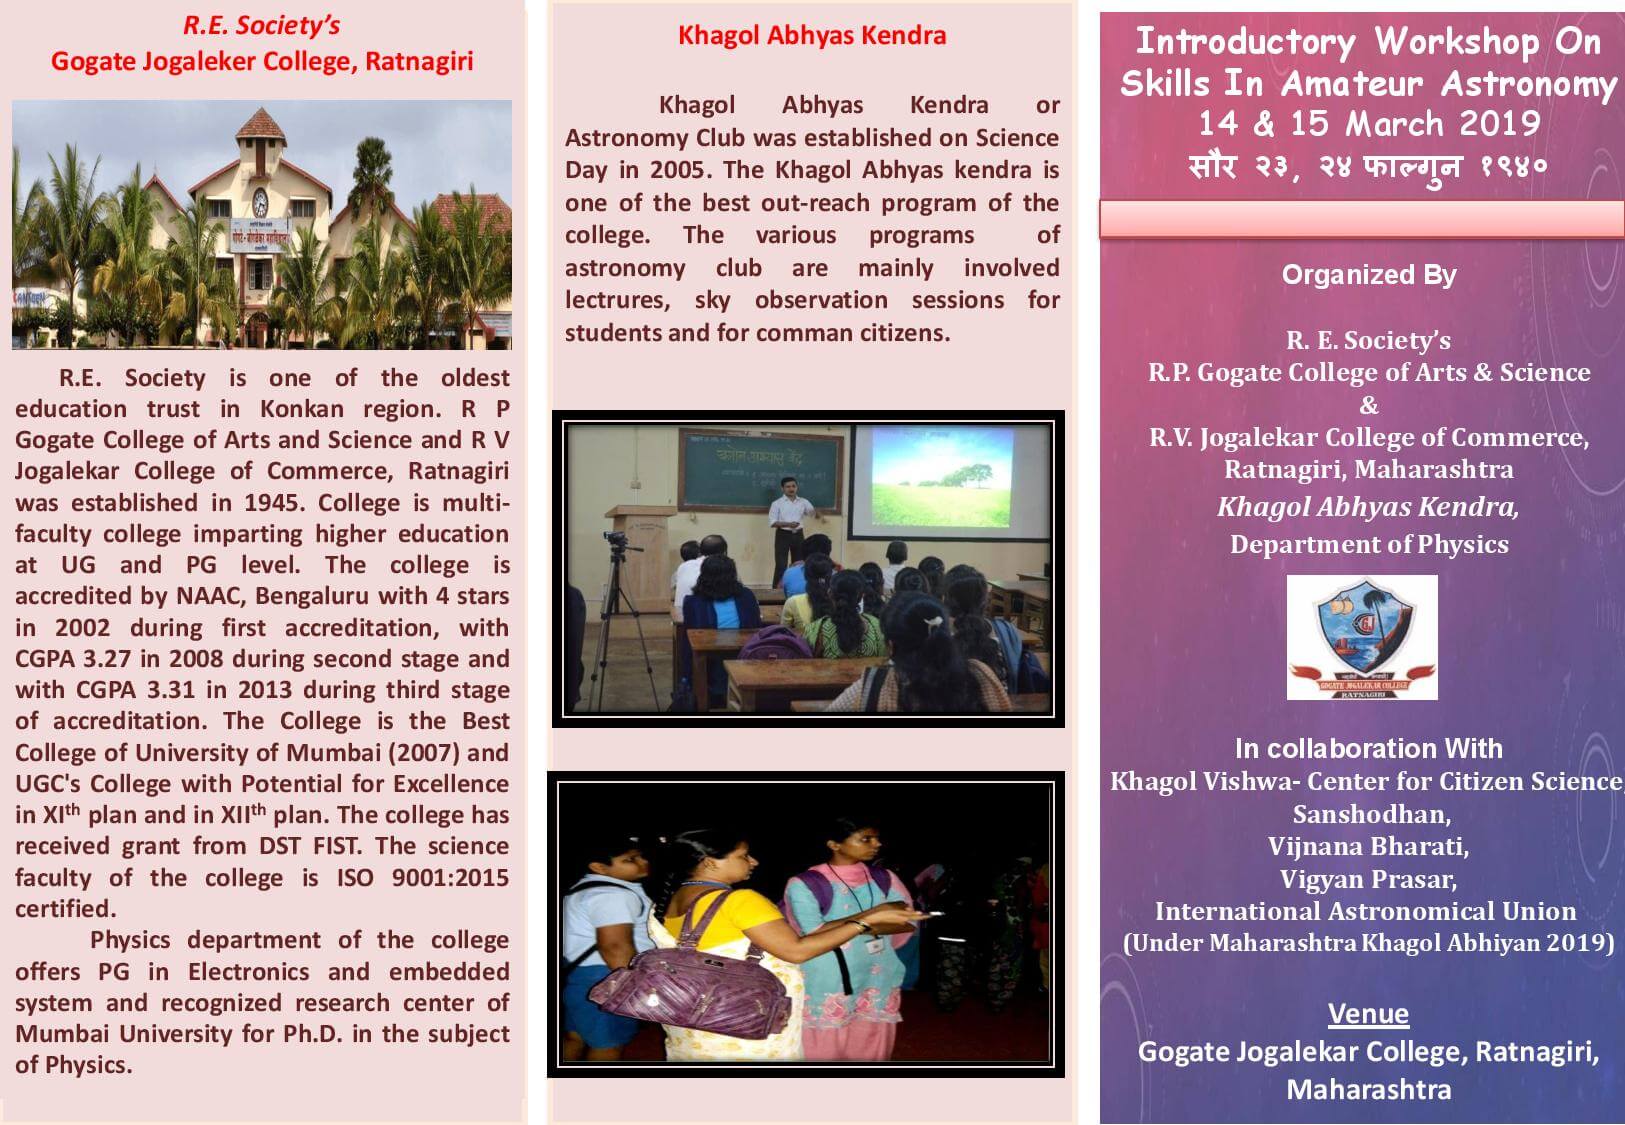 Introductory Workshop On Skills In Amateur Astronomy page-1